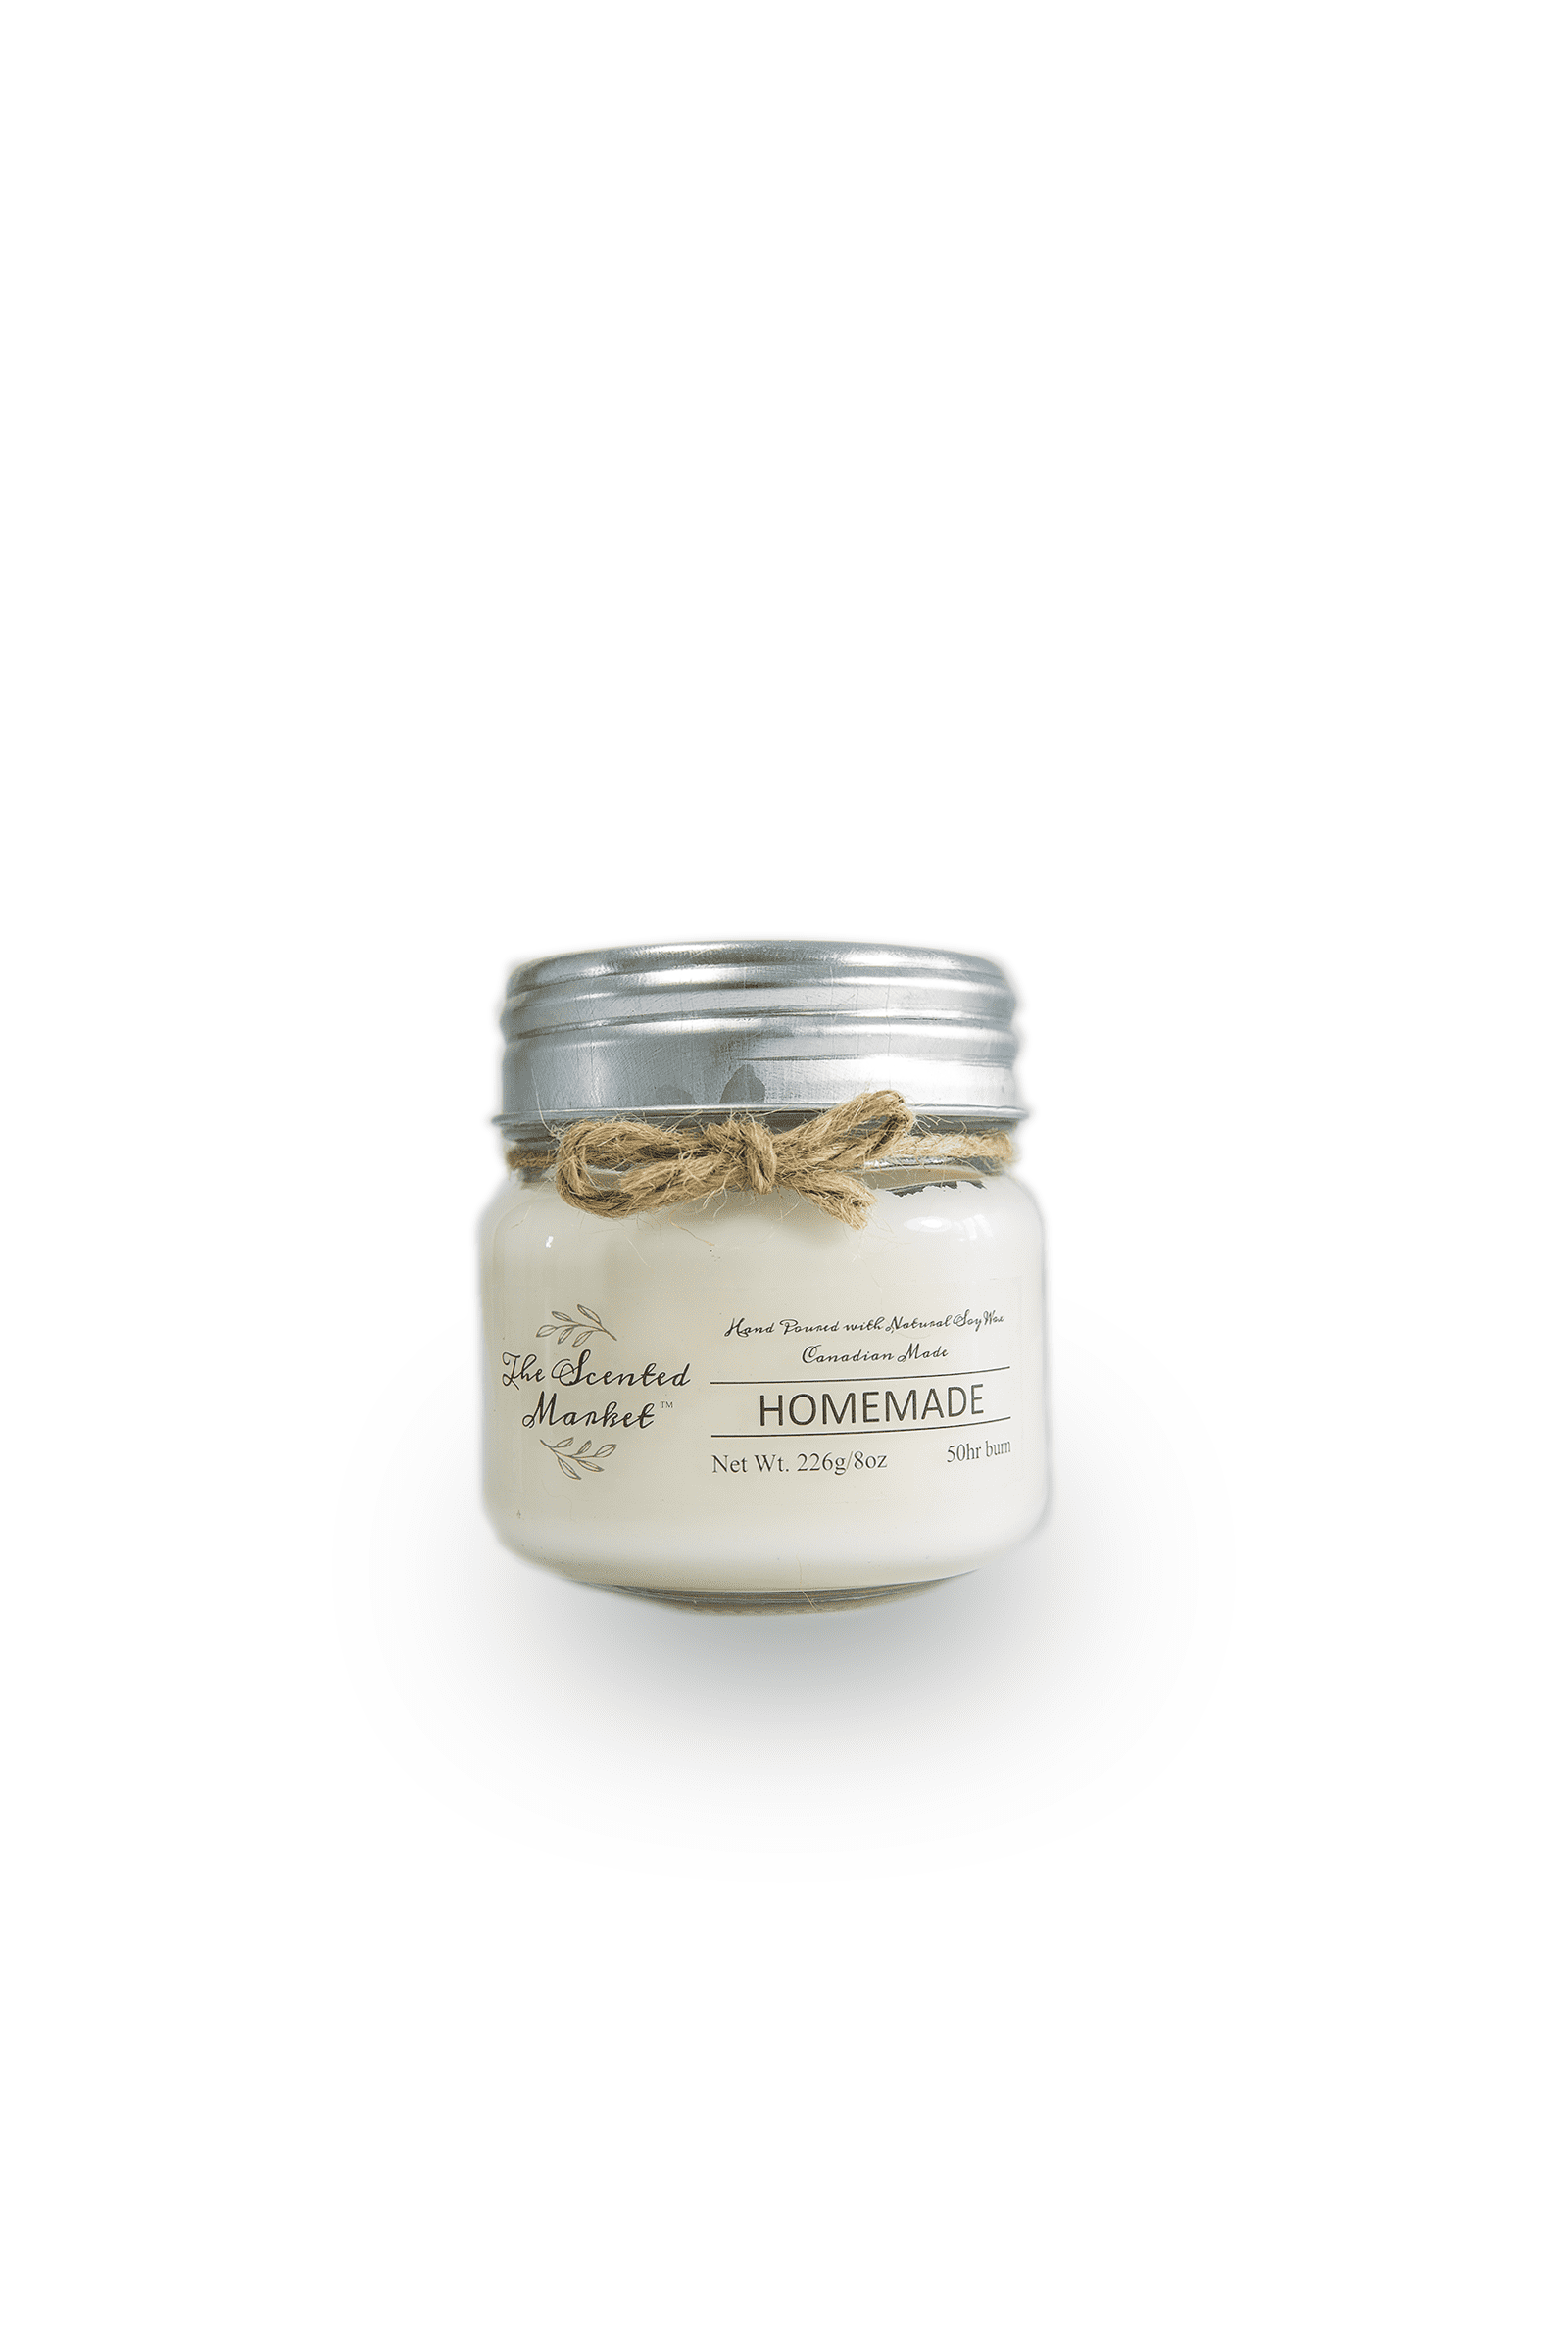 Fall Homemade Scented Soy Wax Mason Jar Candle in 8oz